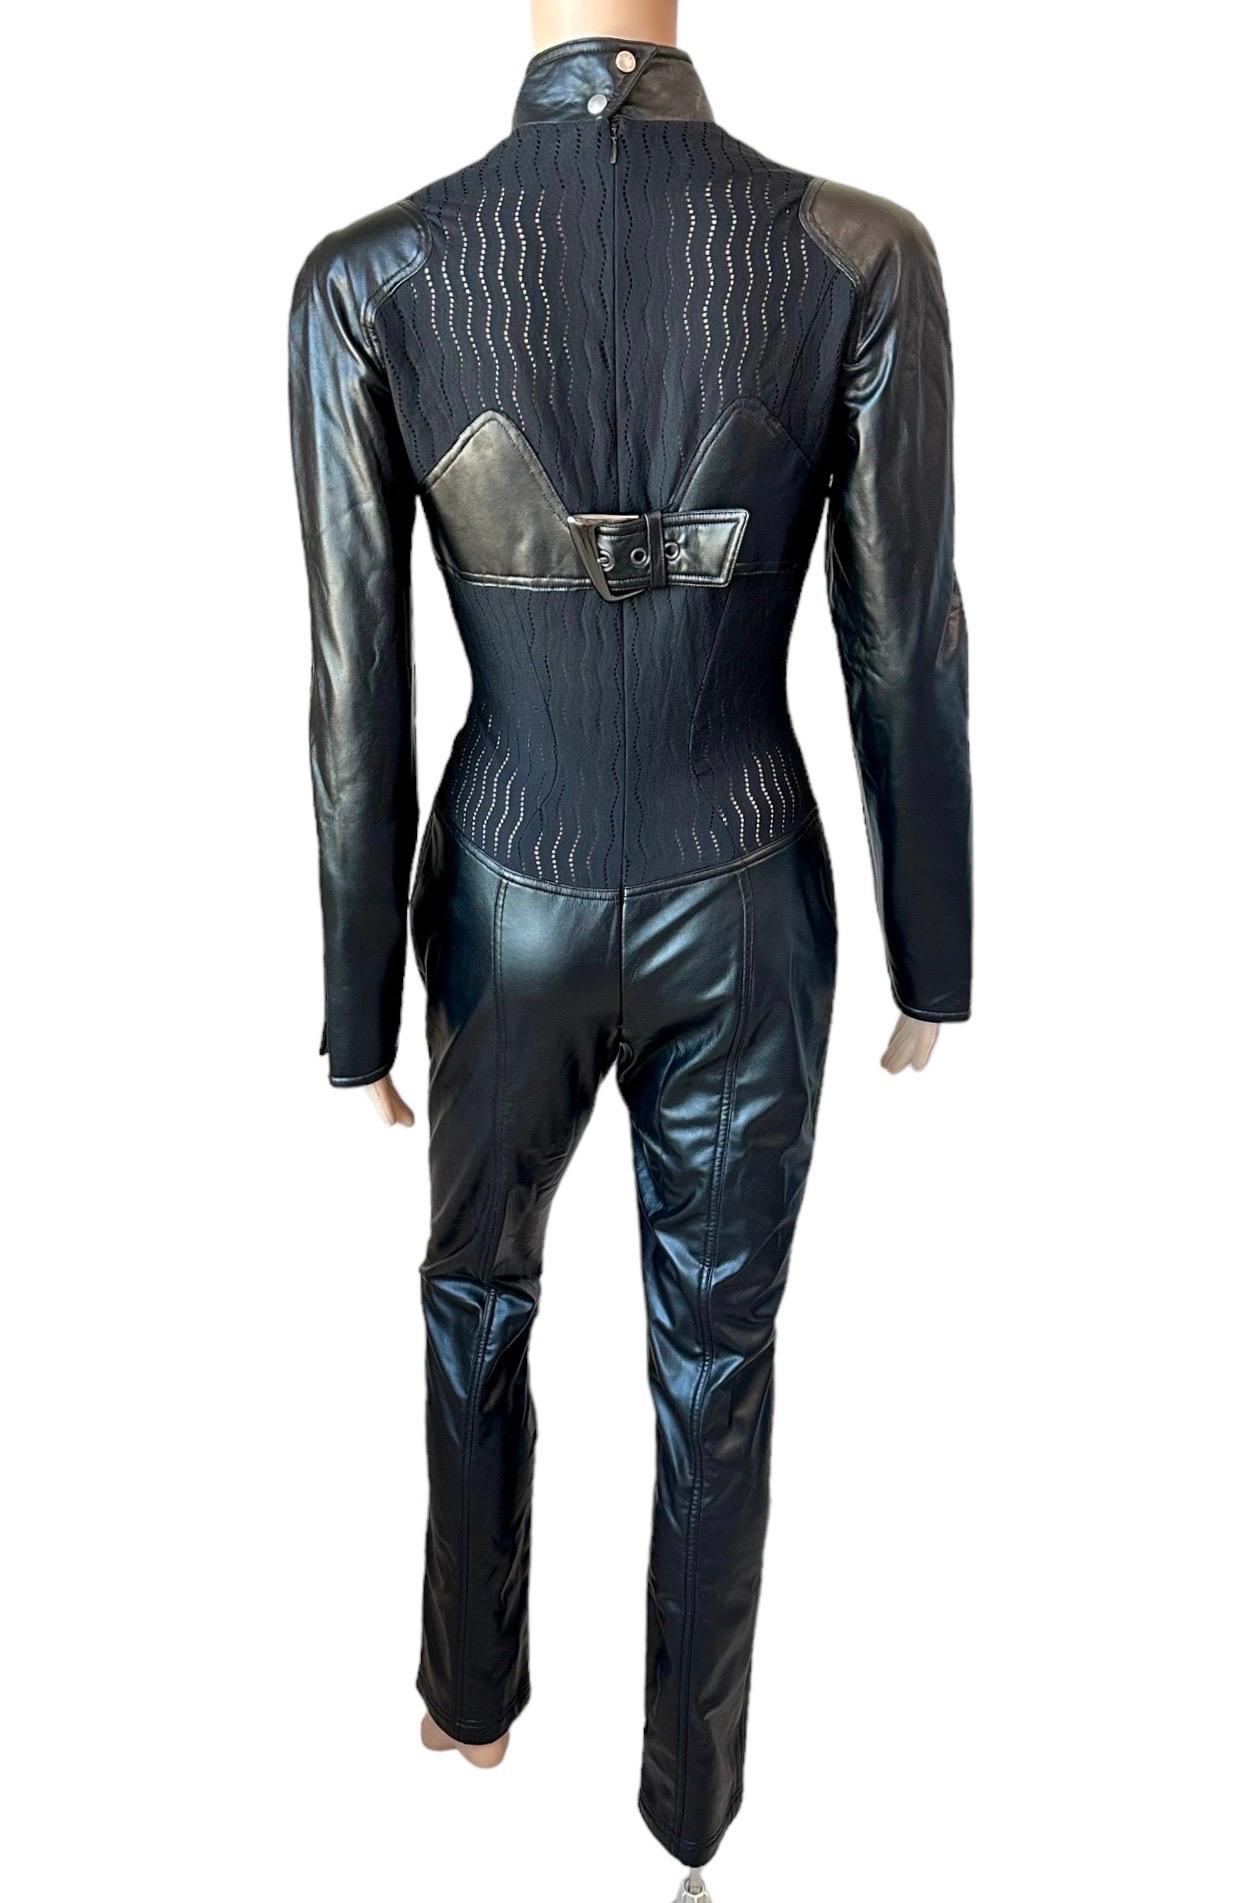 Mugler Vintage Leather Look Semi-Sheer Open Knit Panels Black Jumpsuit

Mugler black leather look jumpsuit featuring semi-sheer open knit panels, mock neck style, buckled in the back and concealed zip closure at back. Please note size and fabric